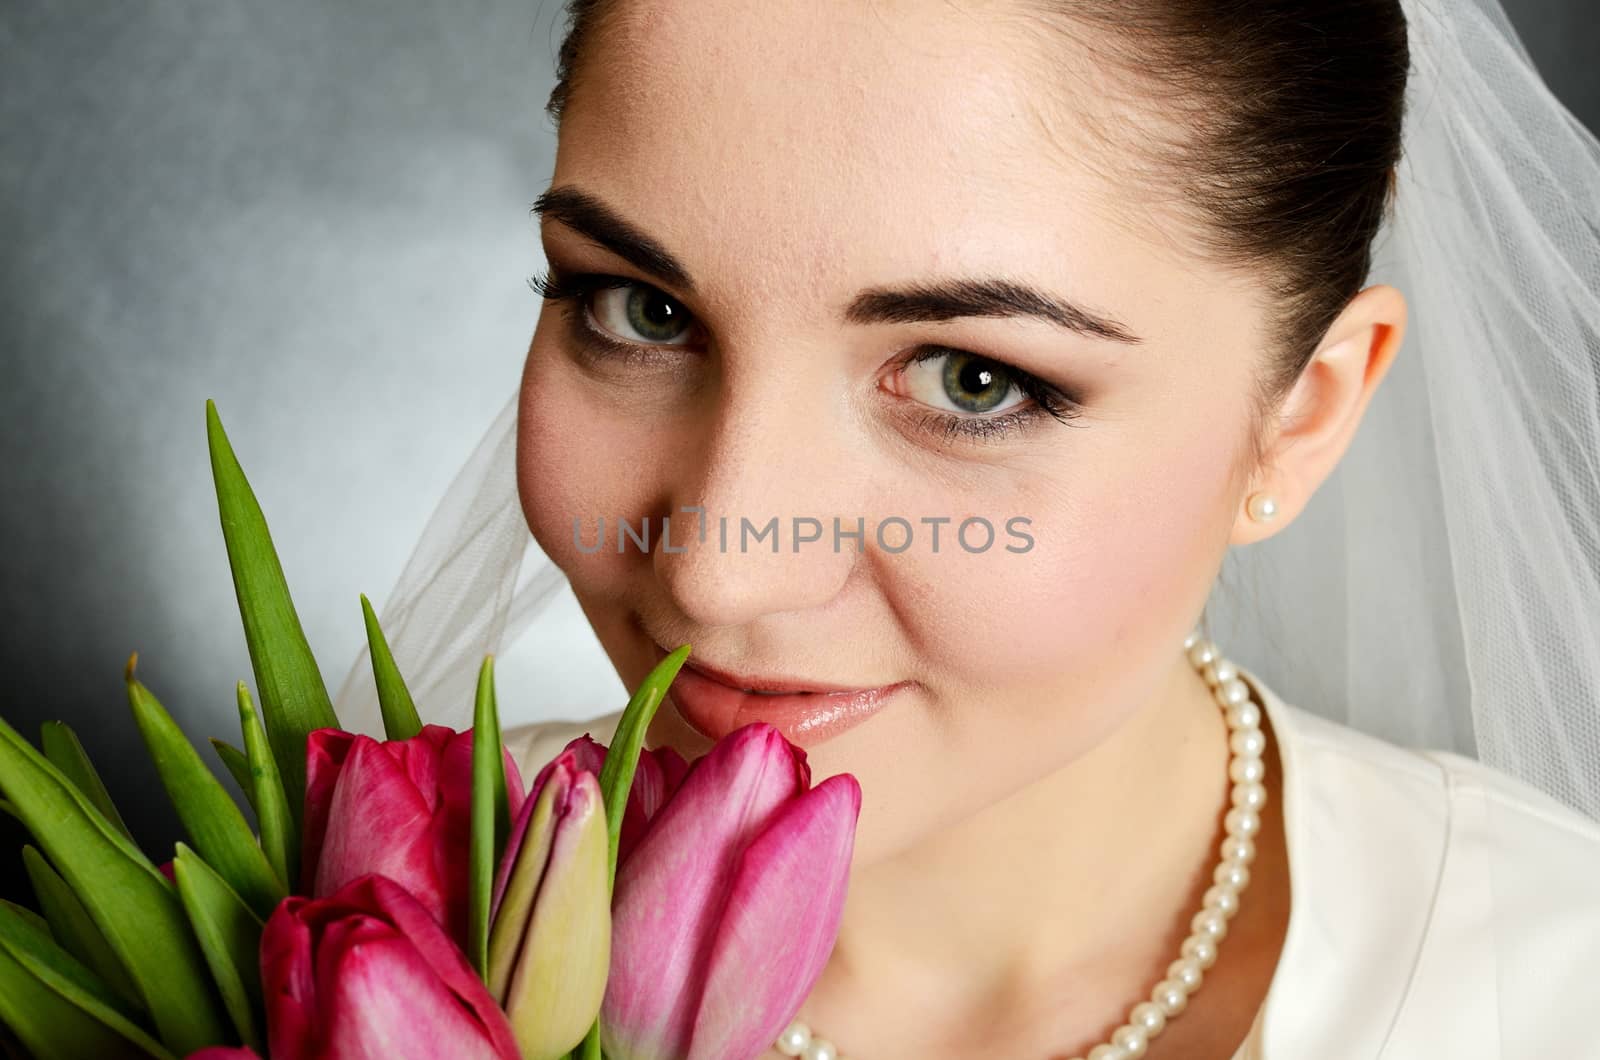 Beautiful, young bride closeup portrait. Young female holding flowers near her face.